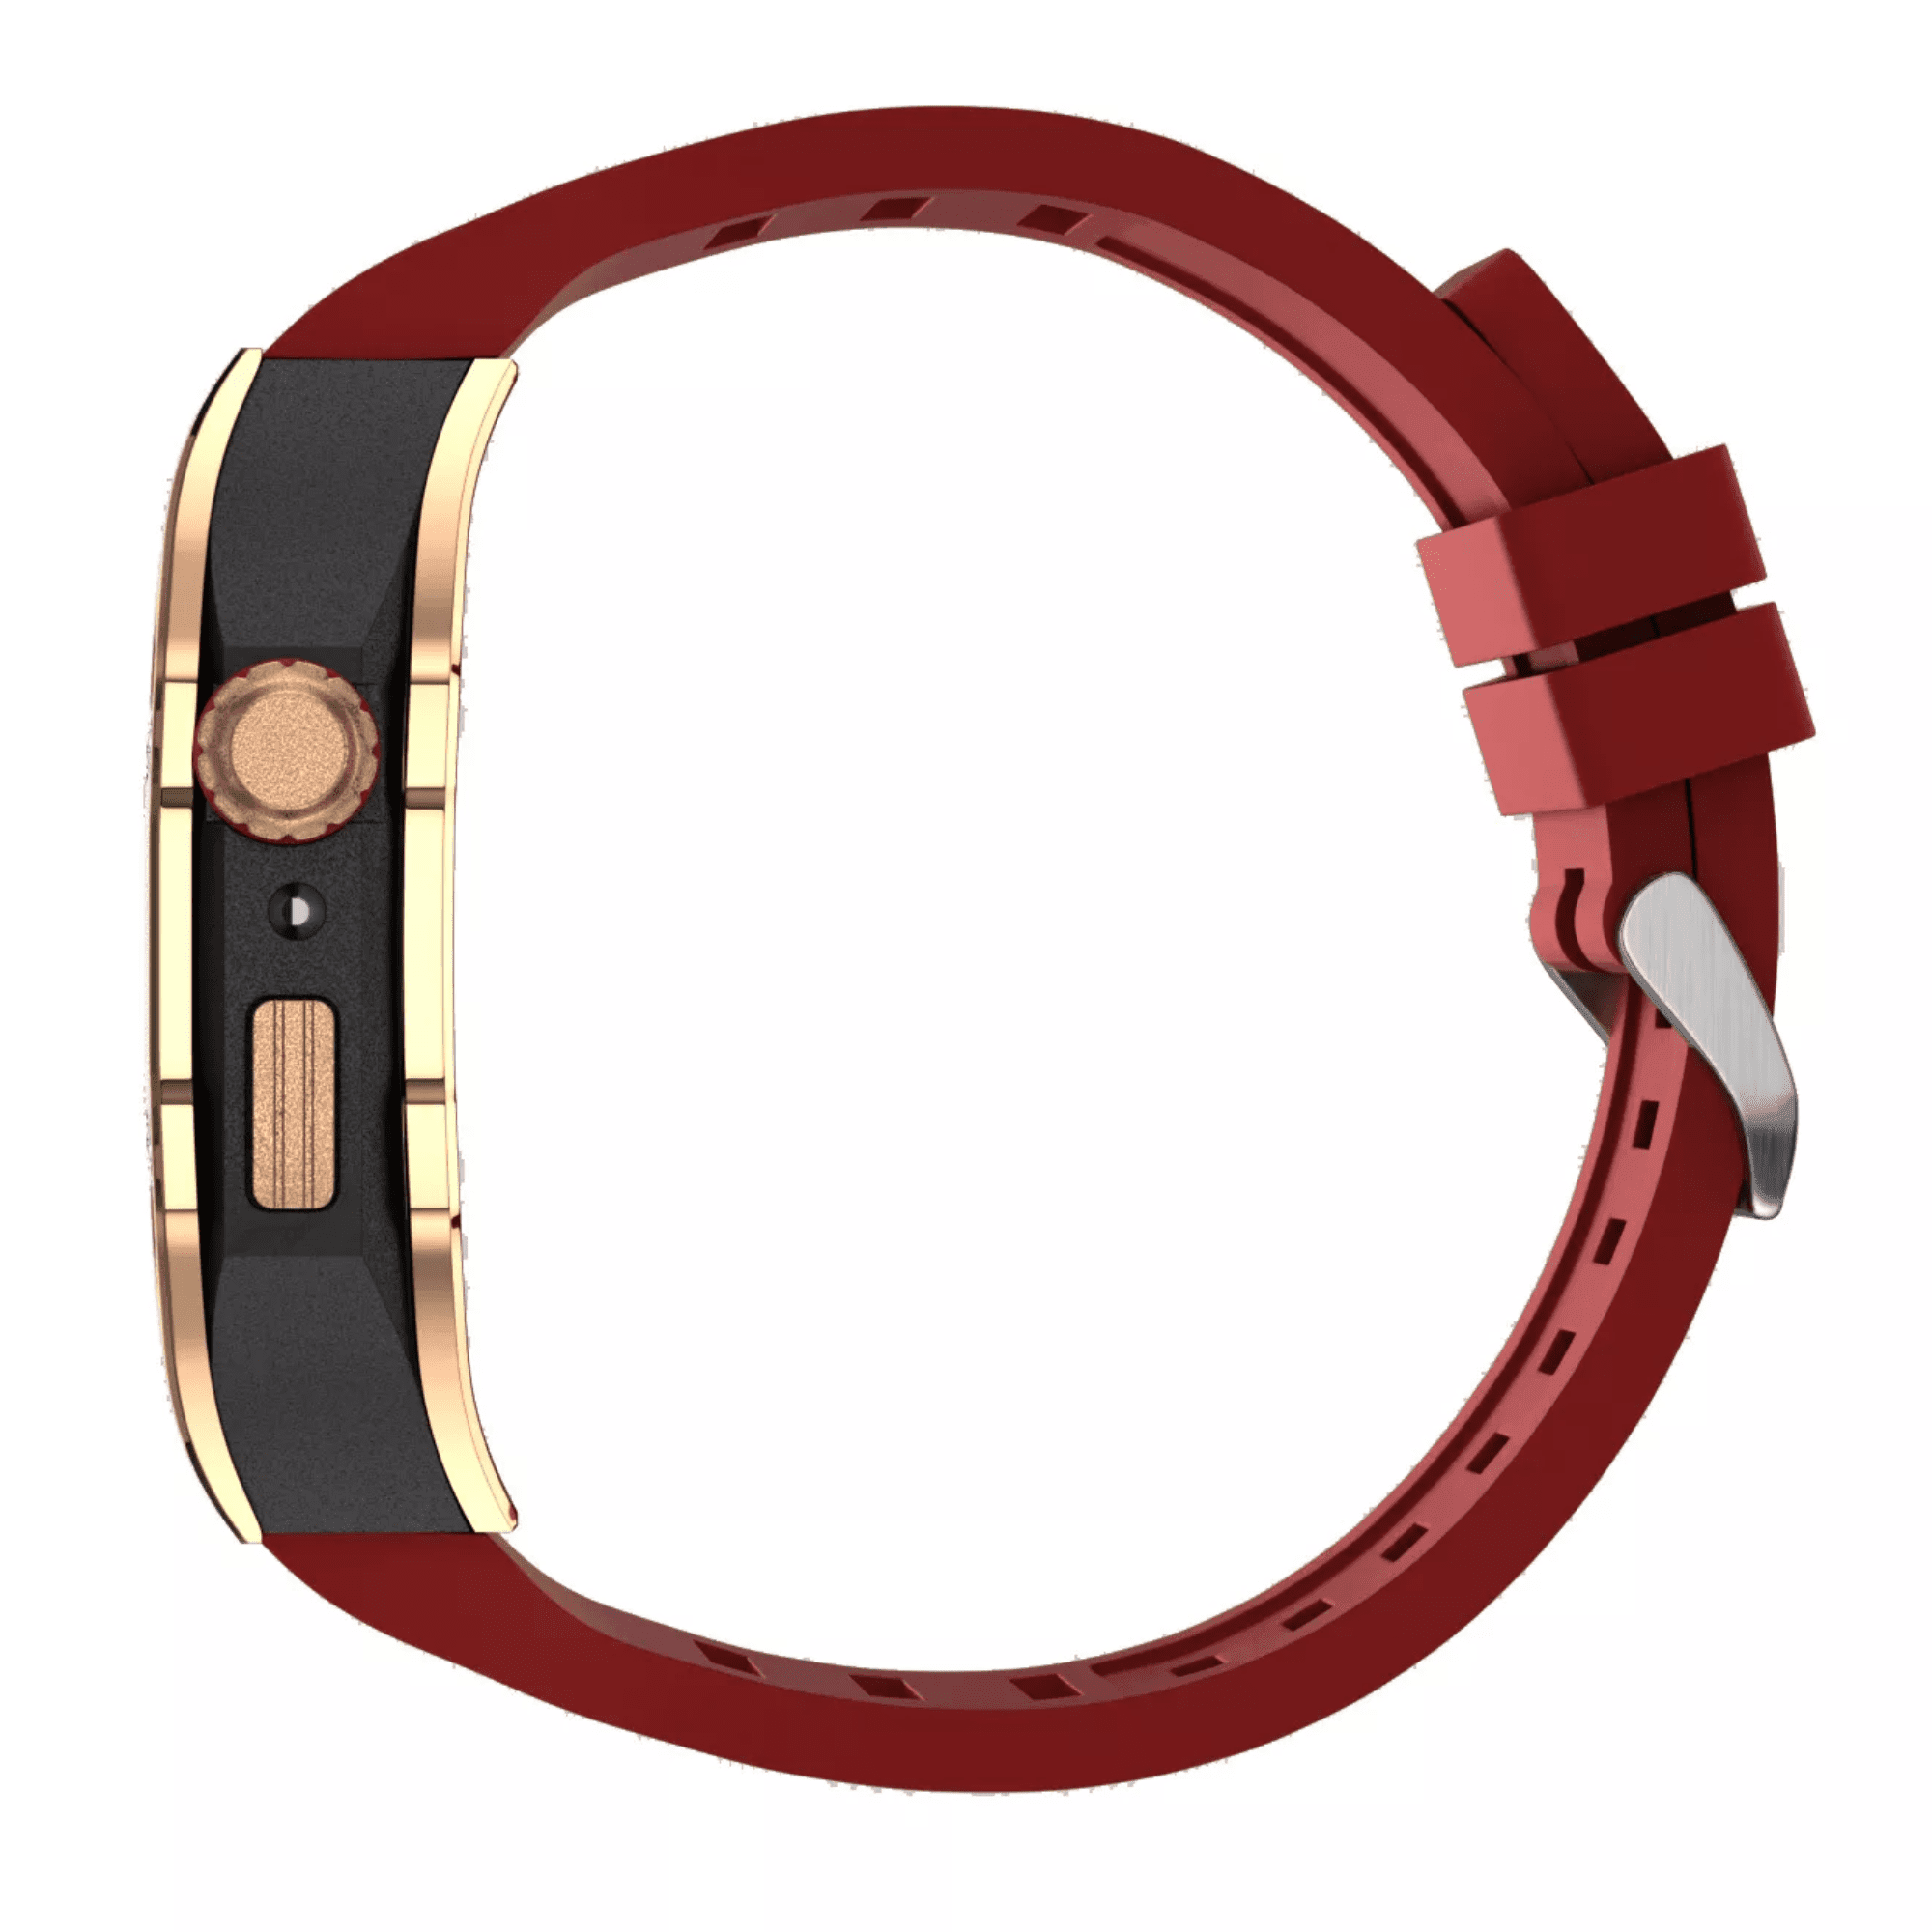 Golden Concept Style Case and Strap for Apple Watch | Luxury & Sporty Apple Watch Case & Fashion Accessory | Mod Kit Replacement for Apple Watch Series SE/3/4/5/67/8 44 mm| Rosè Gold Case - Red Band mod kits india dream watches apple watch